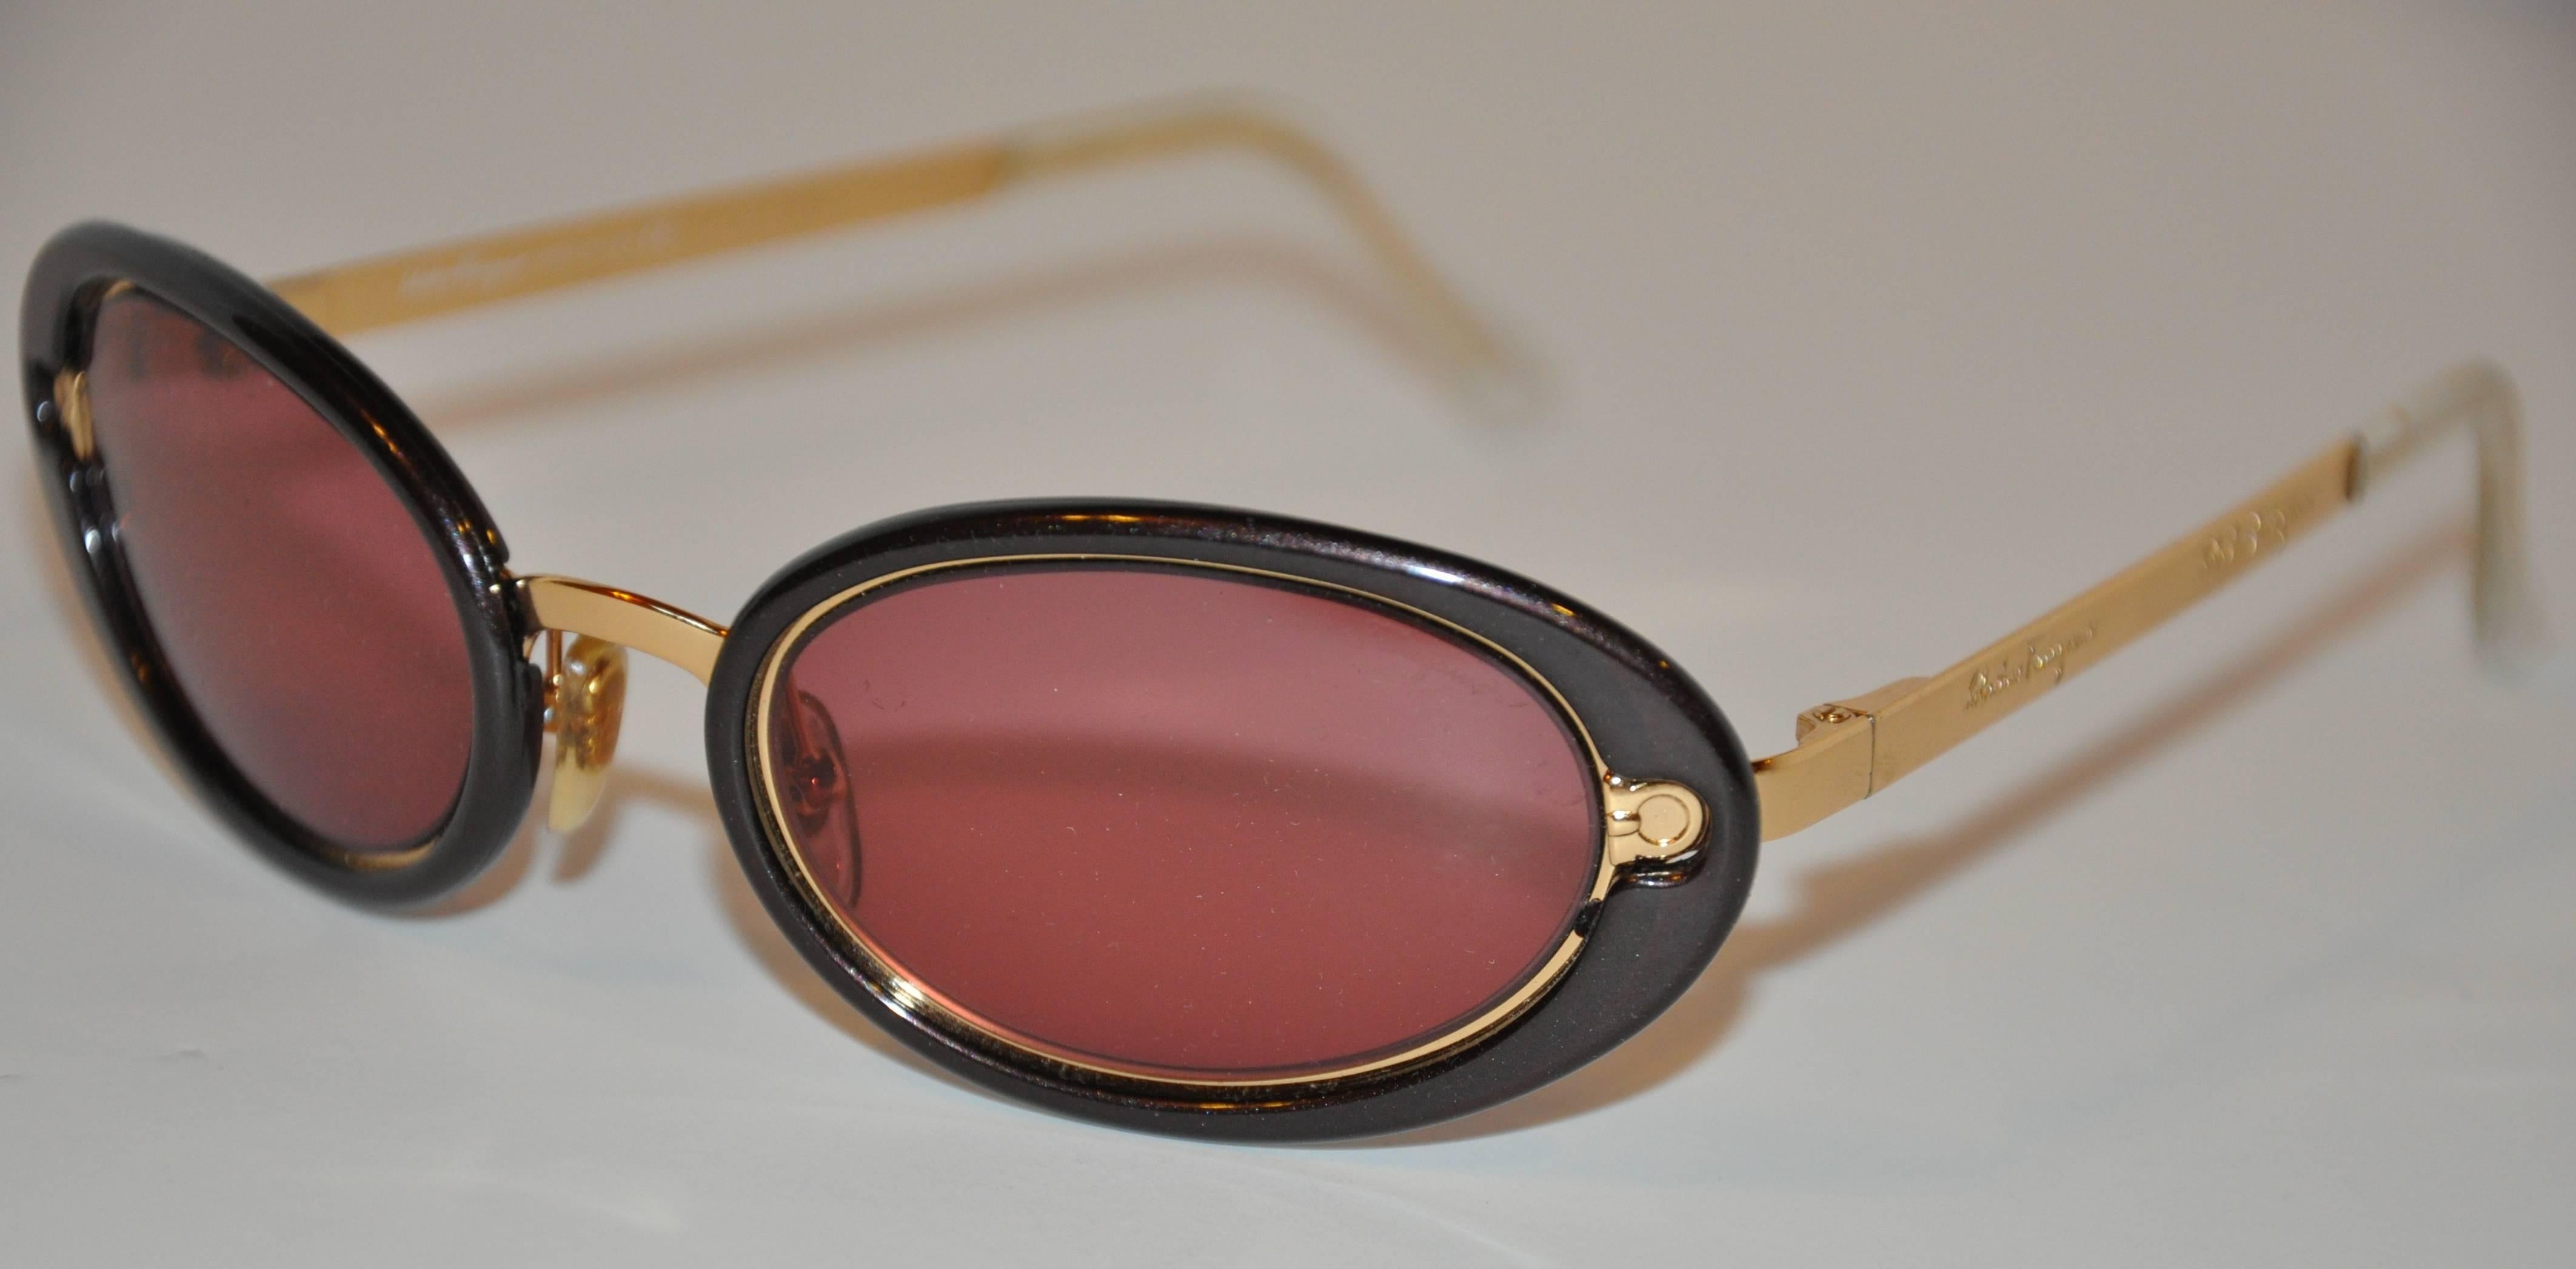 Salvador Ferragamo wonderfully detailed gilded gold tone hardware accented with black lucite overlay measures 5